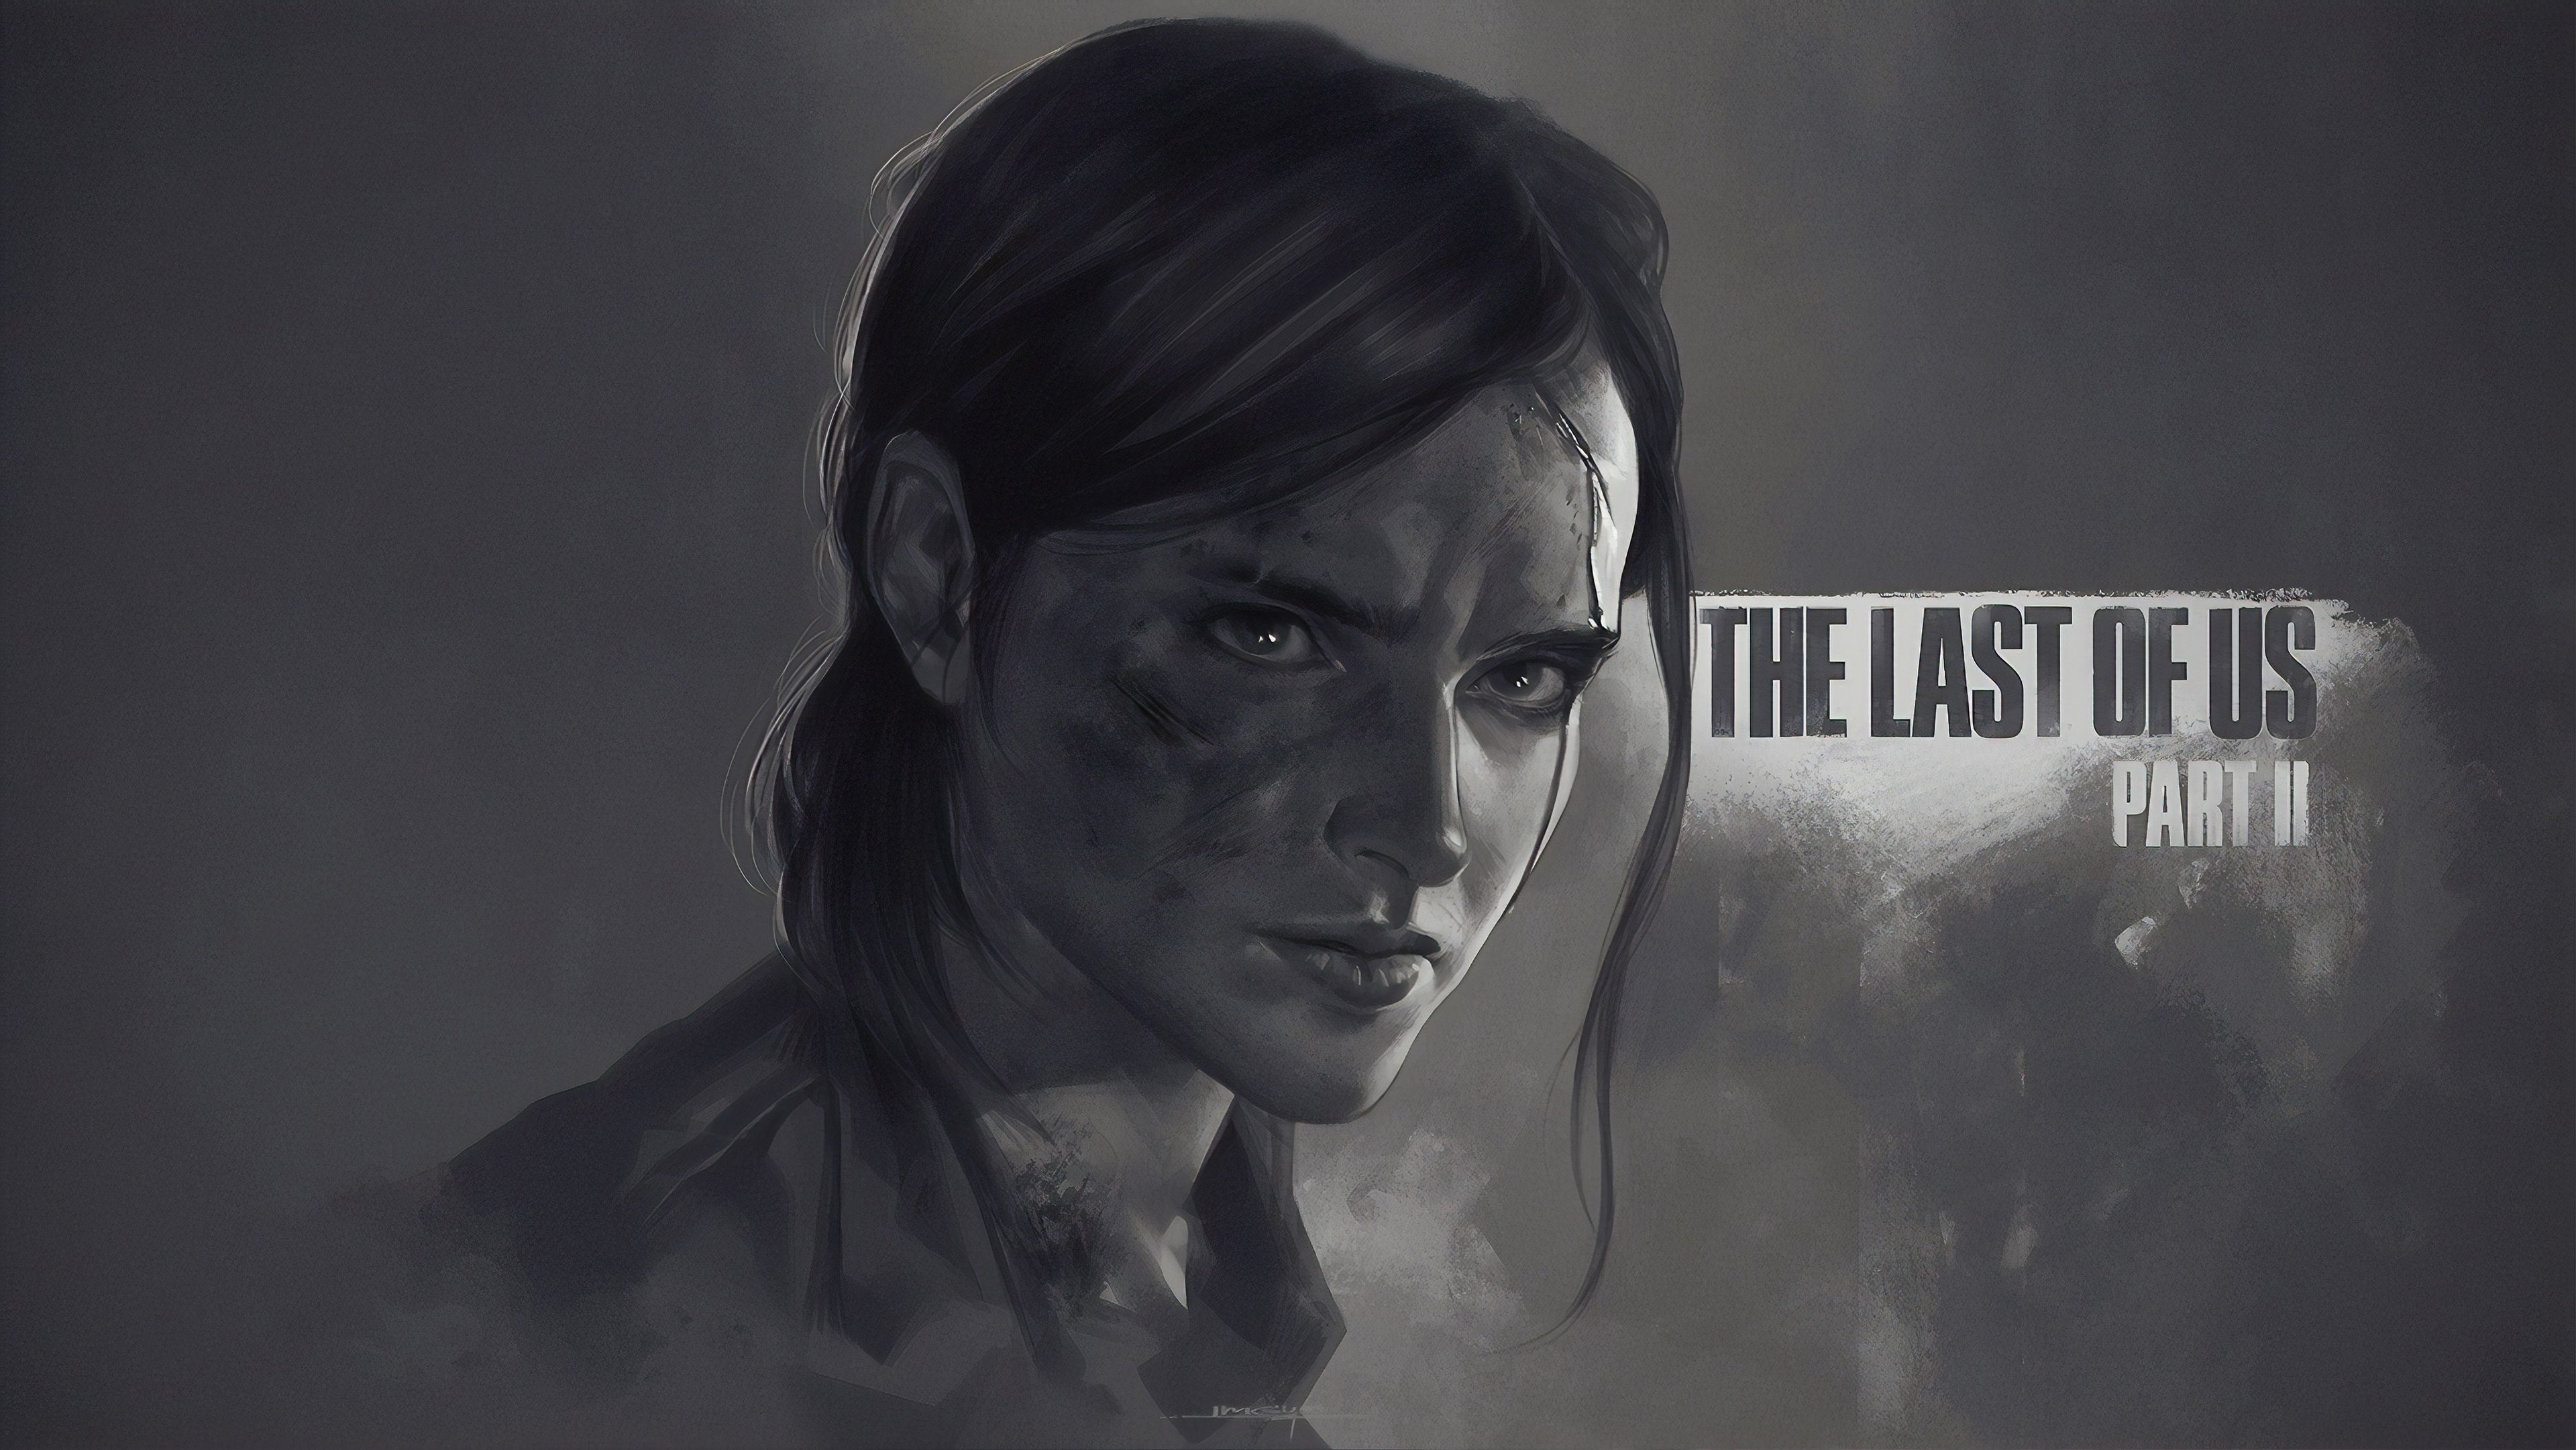 Ellie The Last Of Us Part 2 iPhone 6 plus Wallpaper, HD Games 4K Wallpaper, Image, Photo and Background